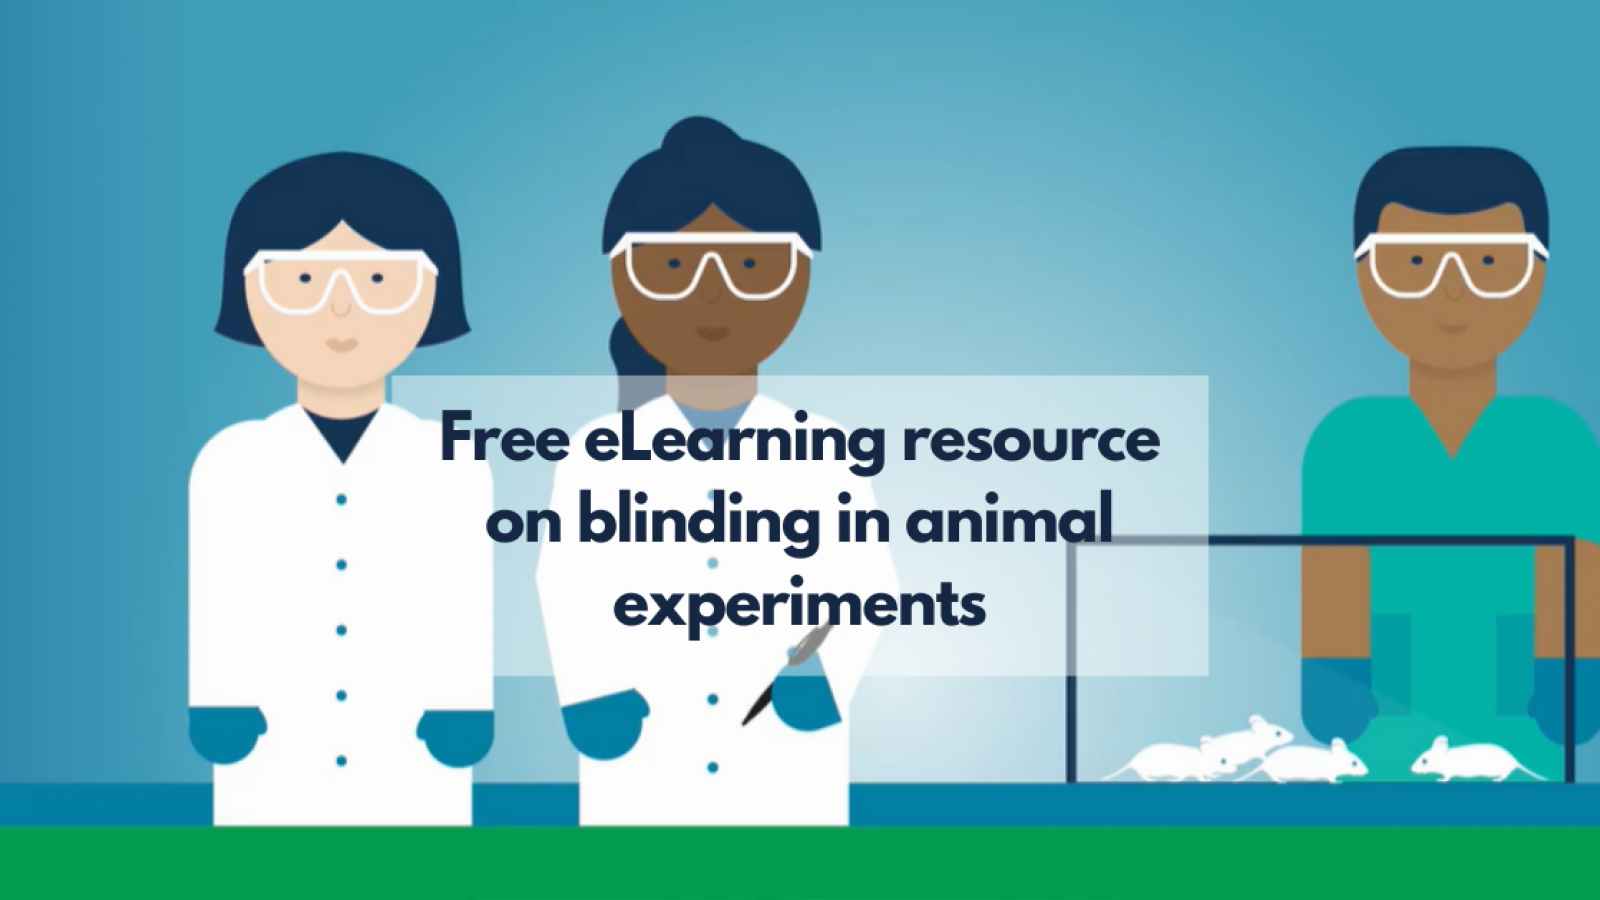 Free eLearning resource on 'blinding' in animal experiments